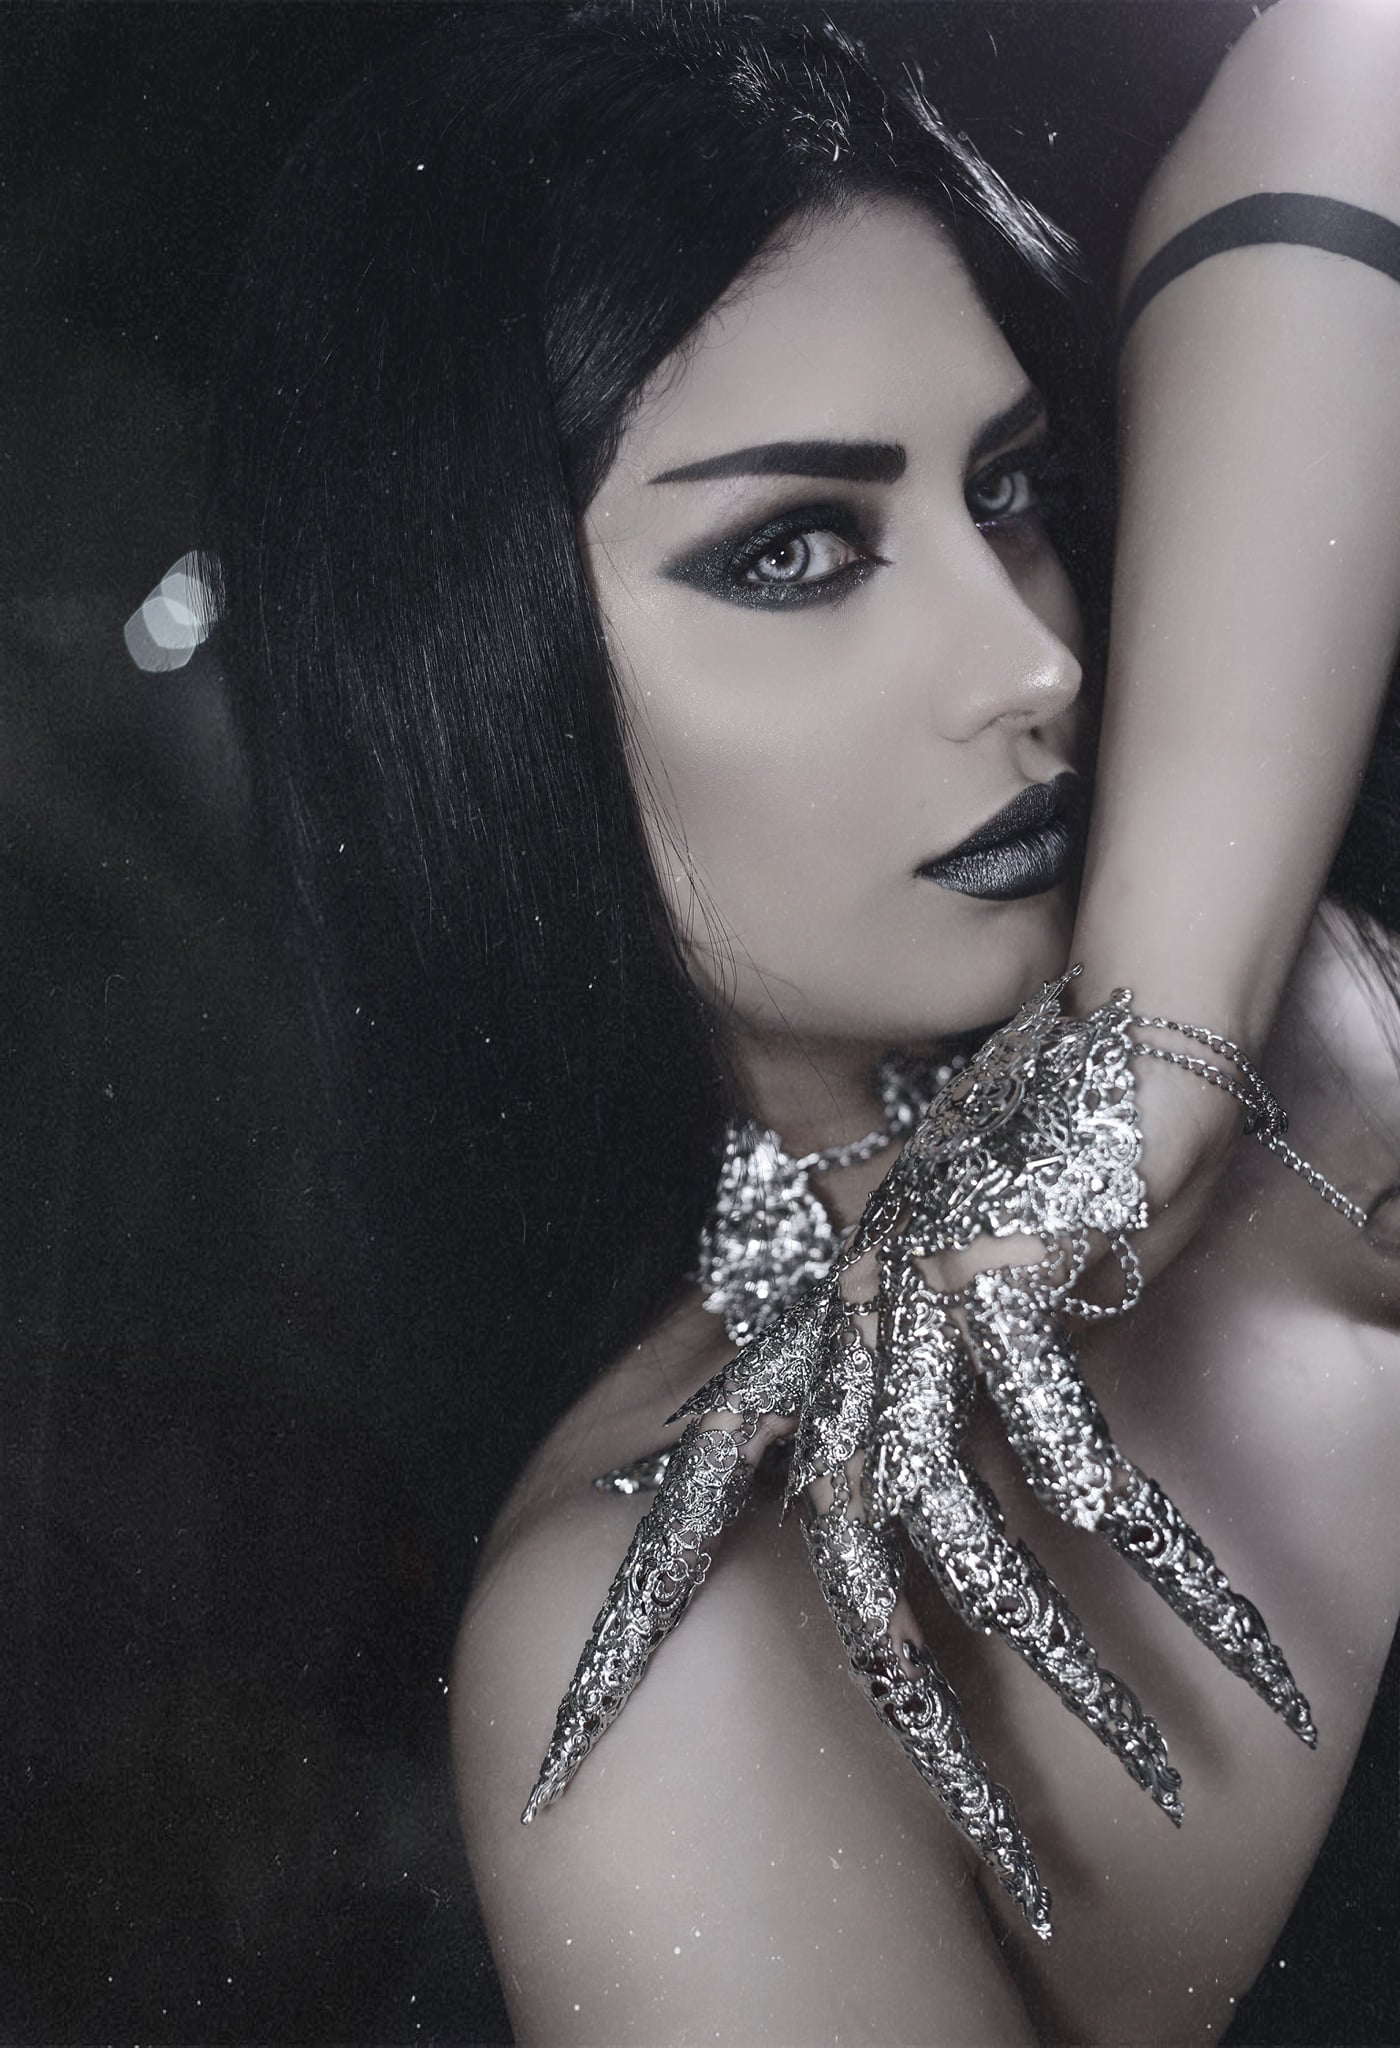 An enigmatic model (Mahafsoun) with striking black hair and makeup showcases Myril Jewels' dark-avantgarde jewelry, a perfect blend of gothic-chic and witchcore styles. The intricate silver finger armor rings create a neo-gothic statement, ideal for punk fashion or a Halloween centerpiece, embodying the brand's unique vision for alternative luxury.